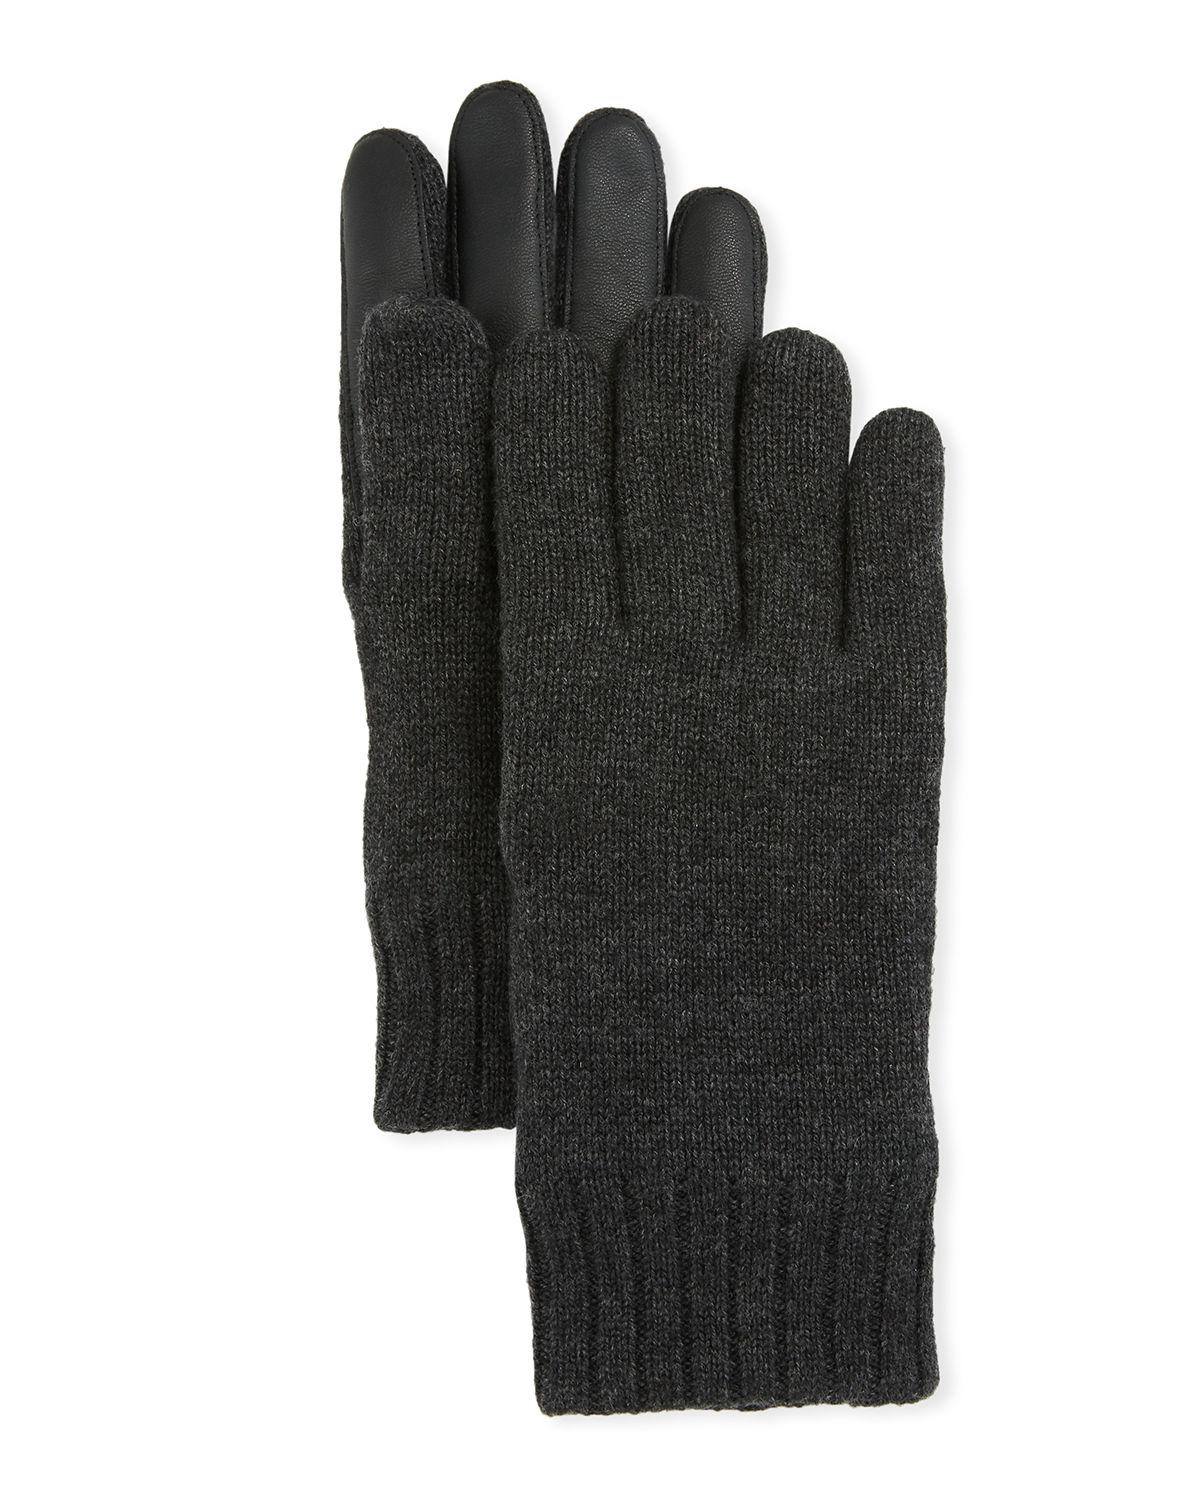 Lyst - UGG Men's Knit Touchscreen Gloves With Conductive Leather Palm ...